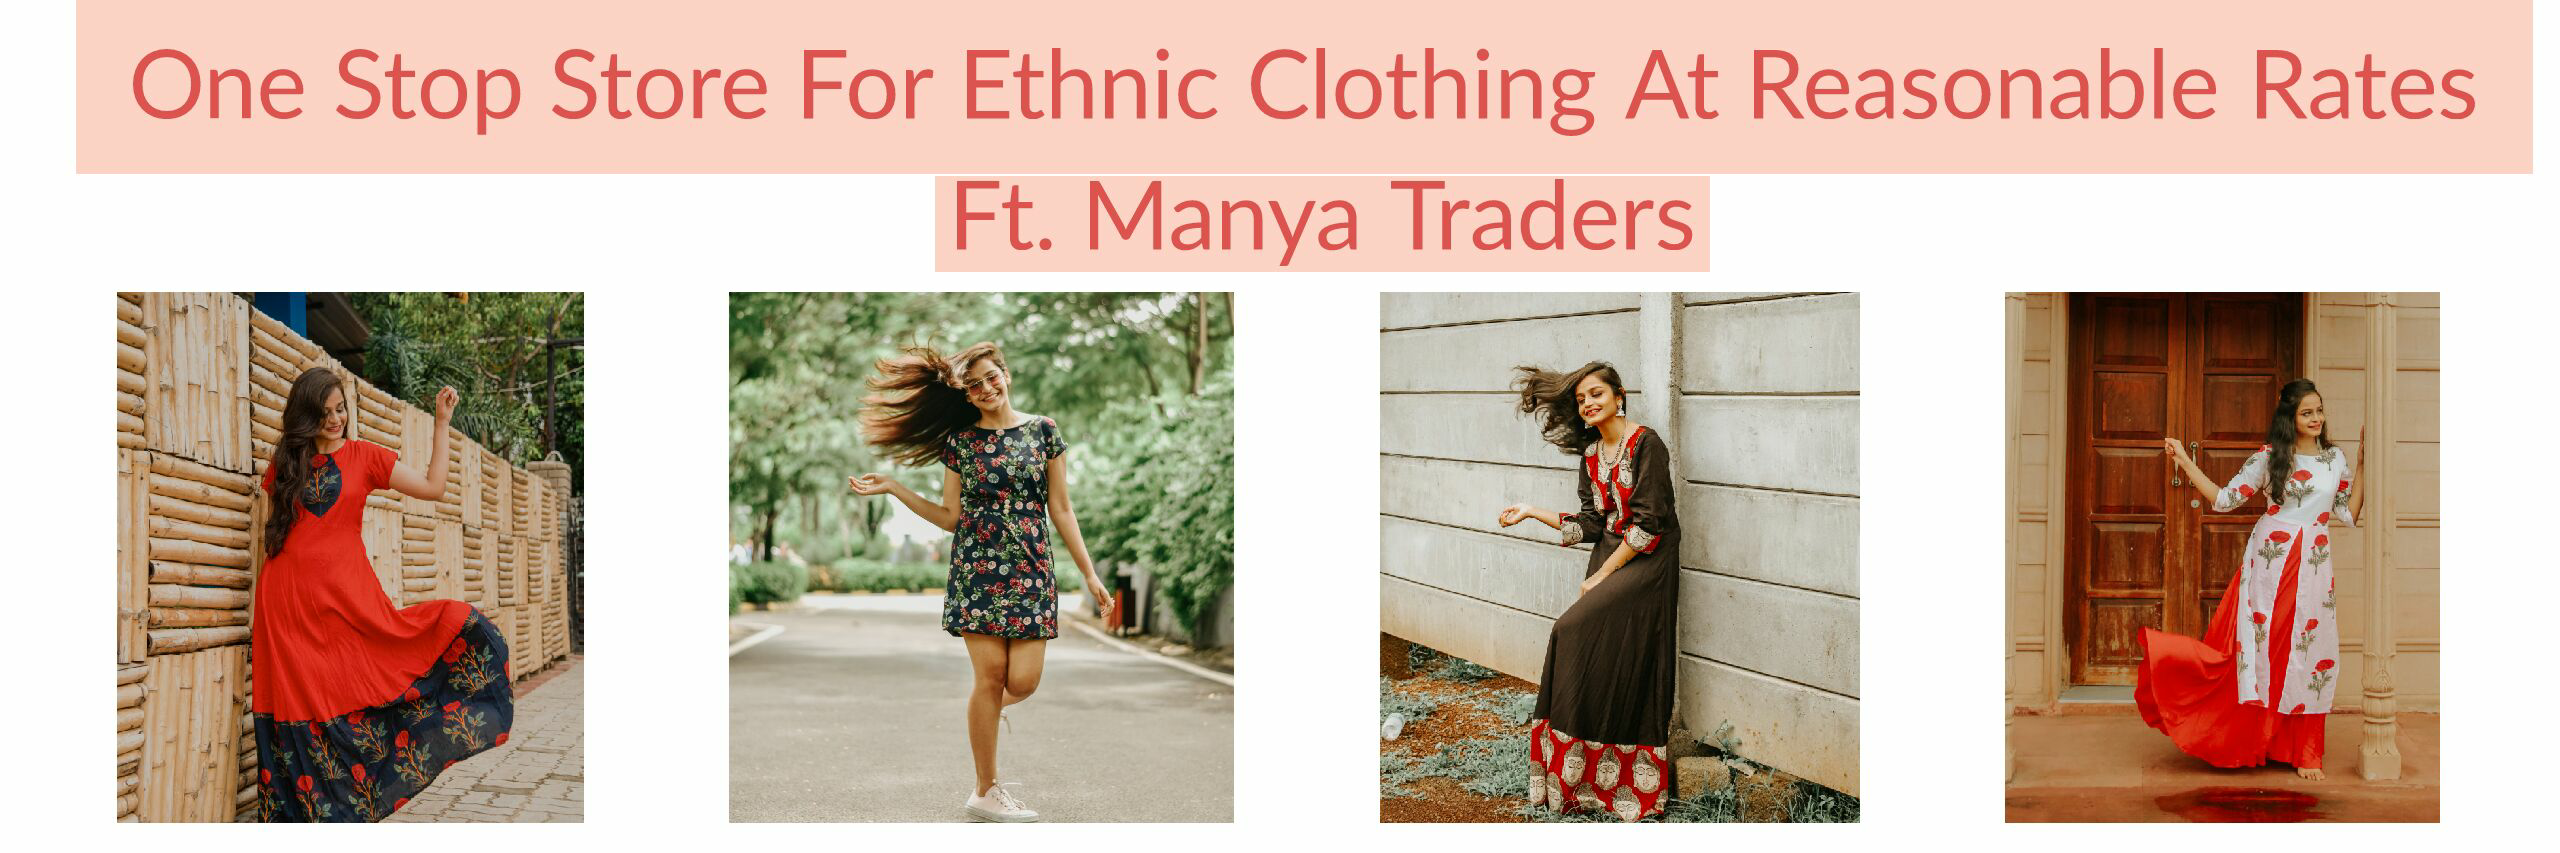 One Stop Store for Ethnic Wear At Reasonable Rates - Manya Traders image